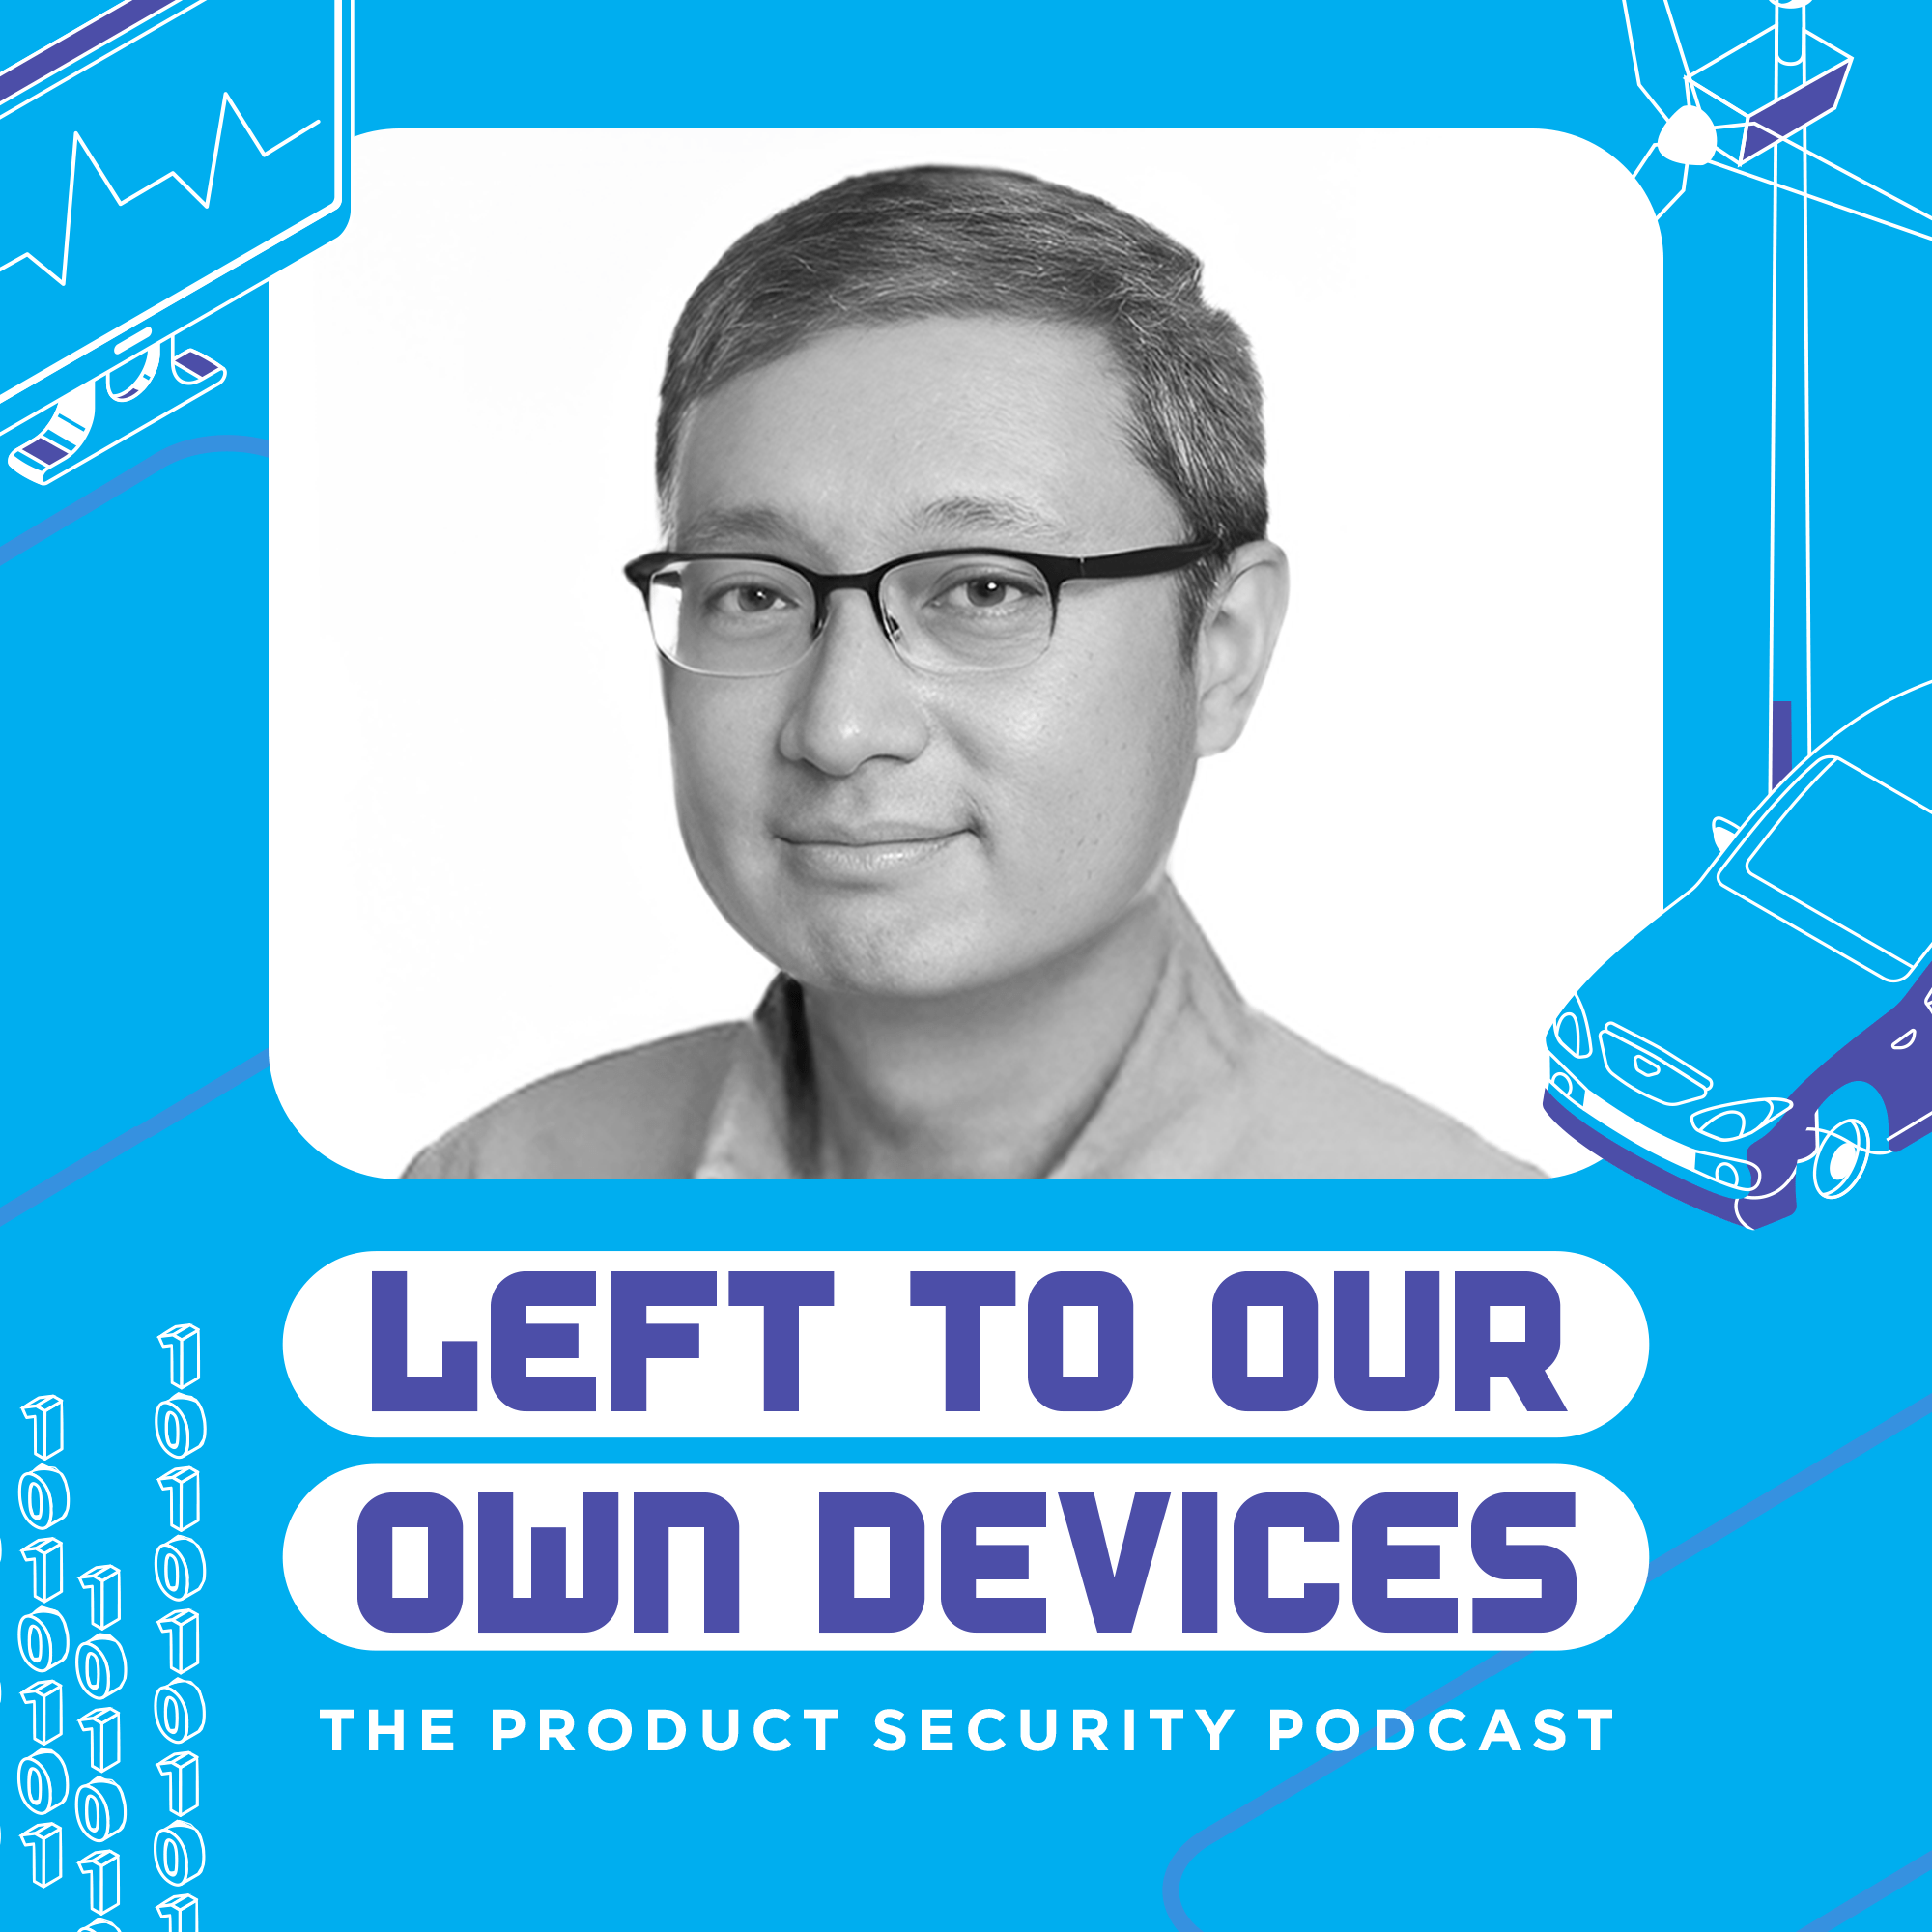 #28: Paul Cha: How LG VS Became CSMS Compliant